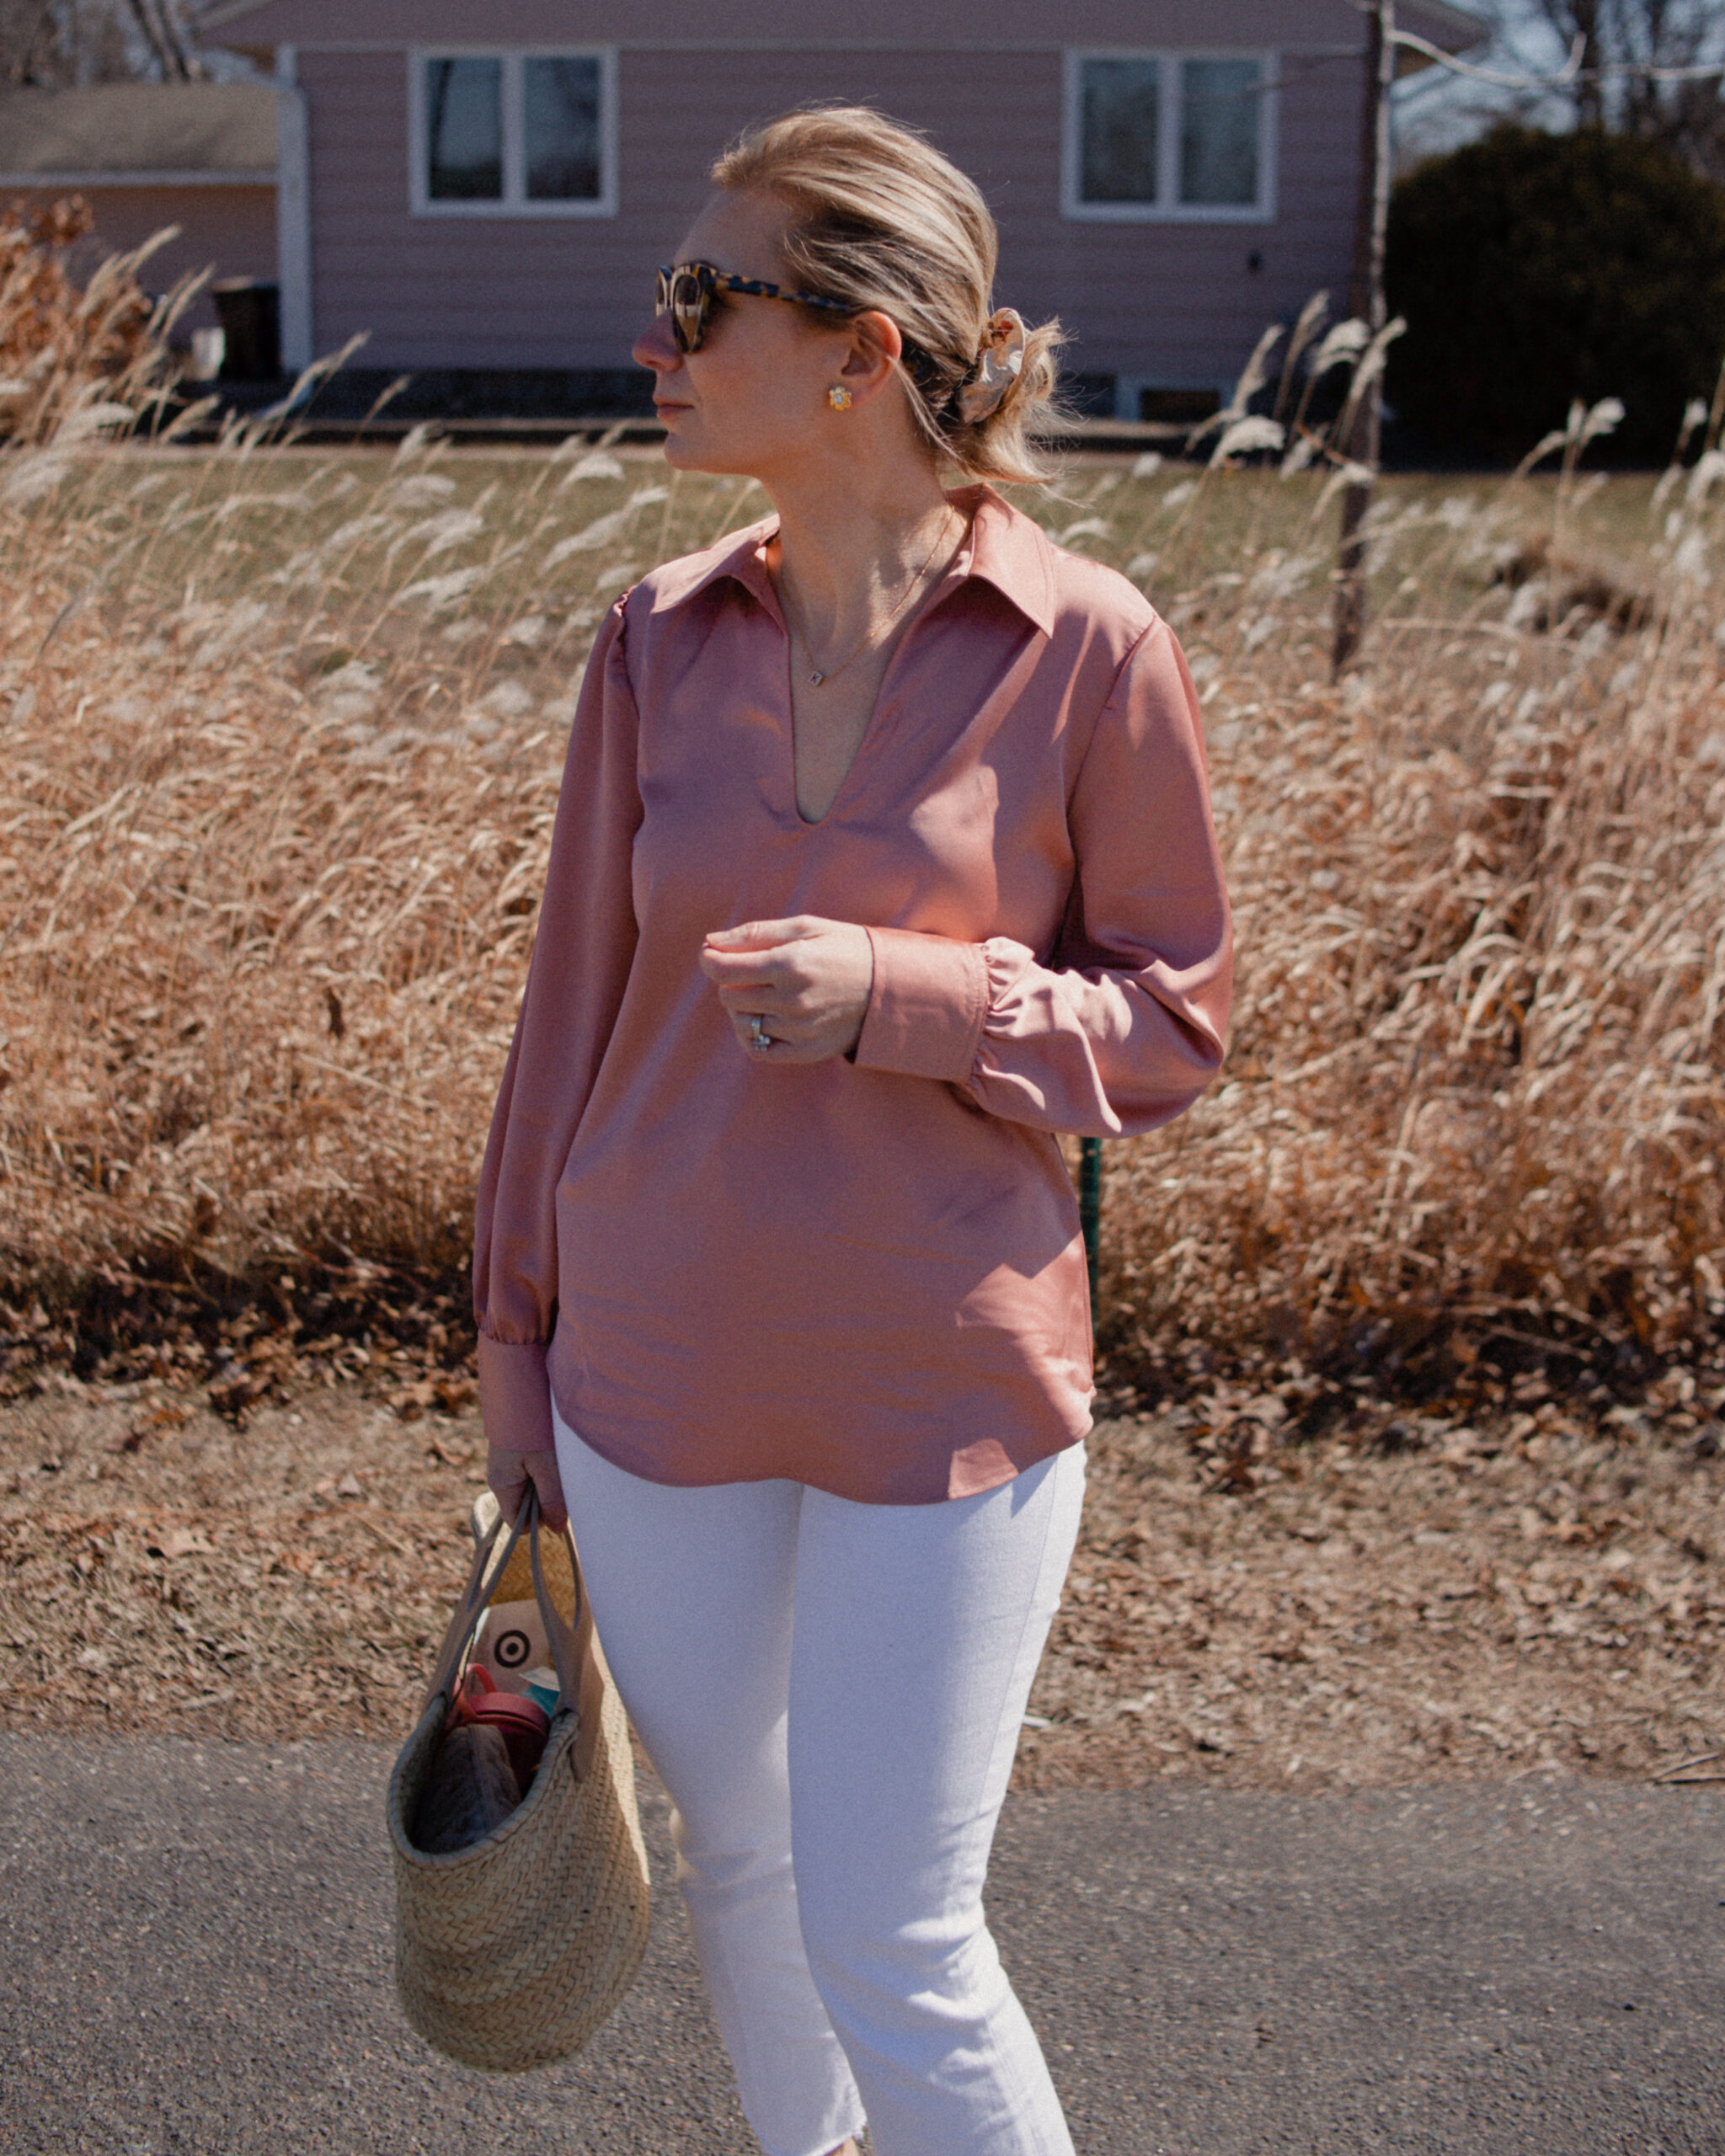 Karin Emily wears a pink satin blouse over white jeans paired with nude mary jane flats and a hereu basket bag